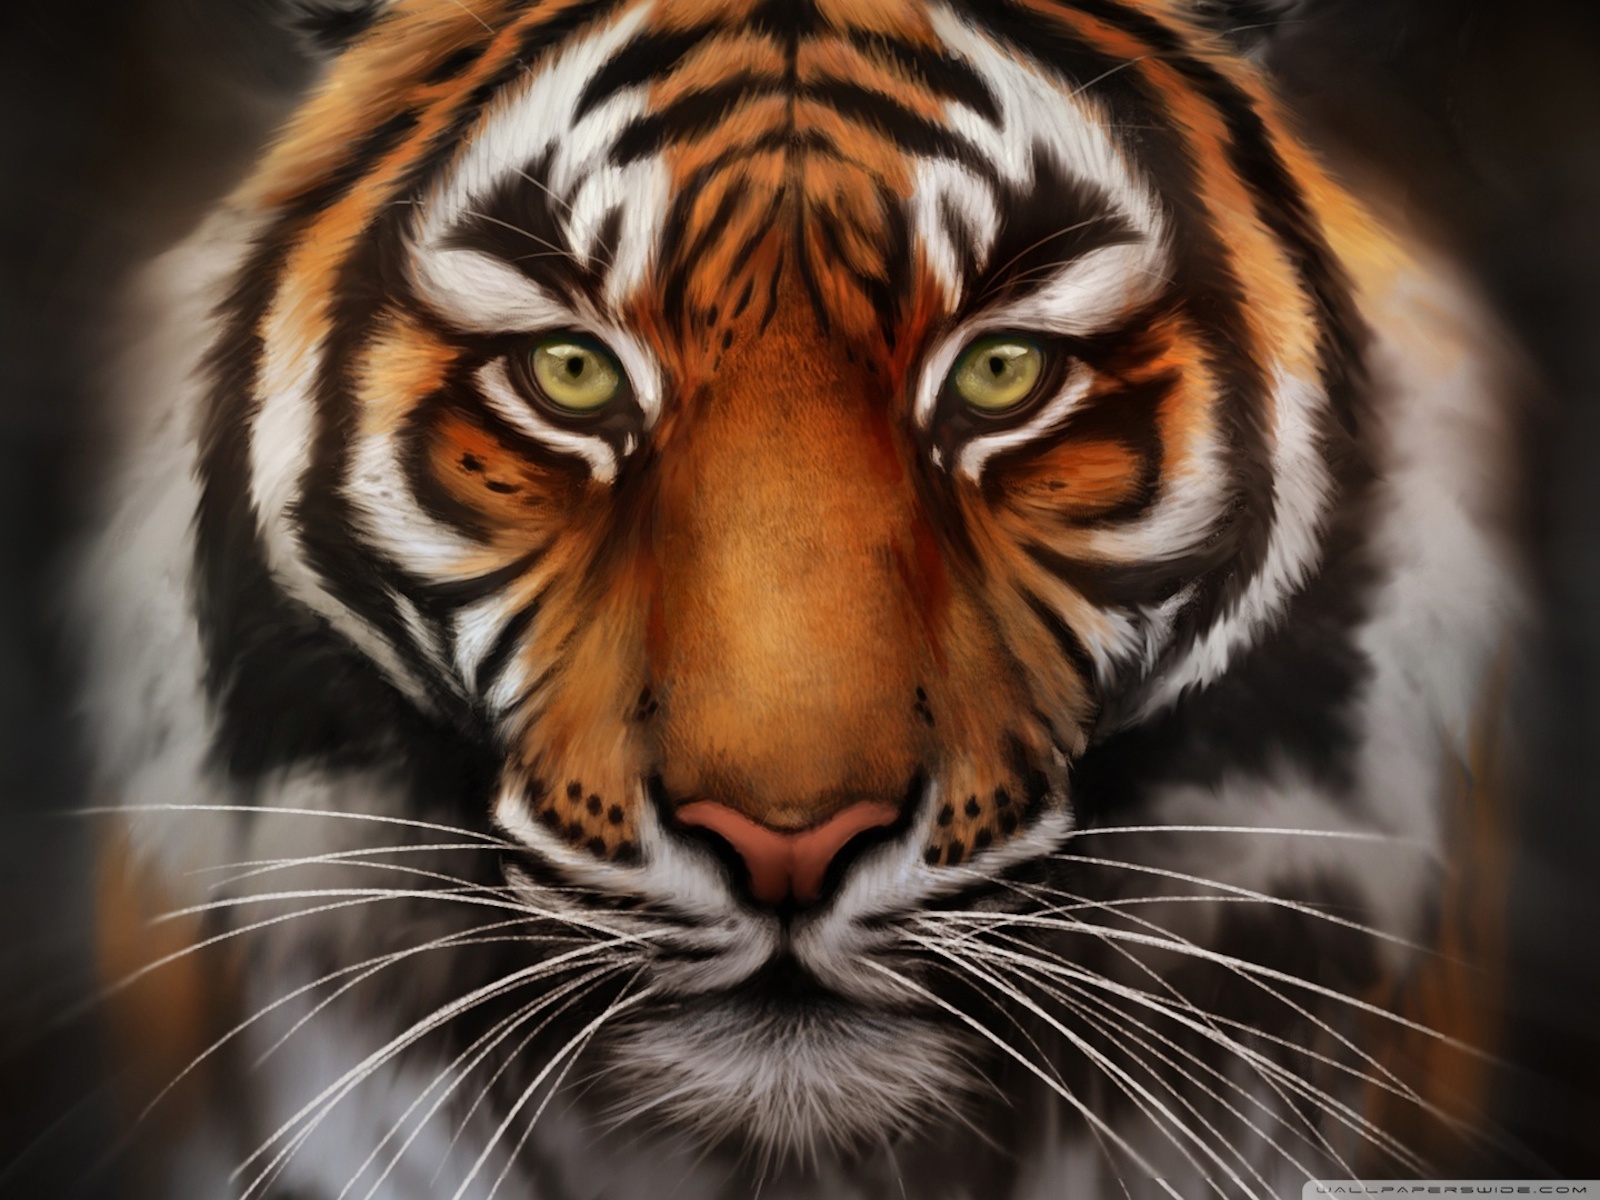 Free Tiger Face, Download Free Clip Art, Free Clip Art on.